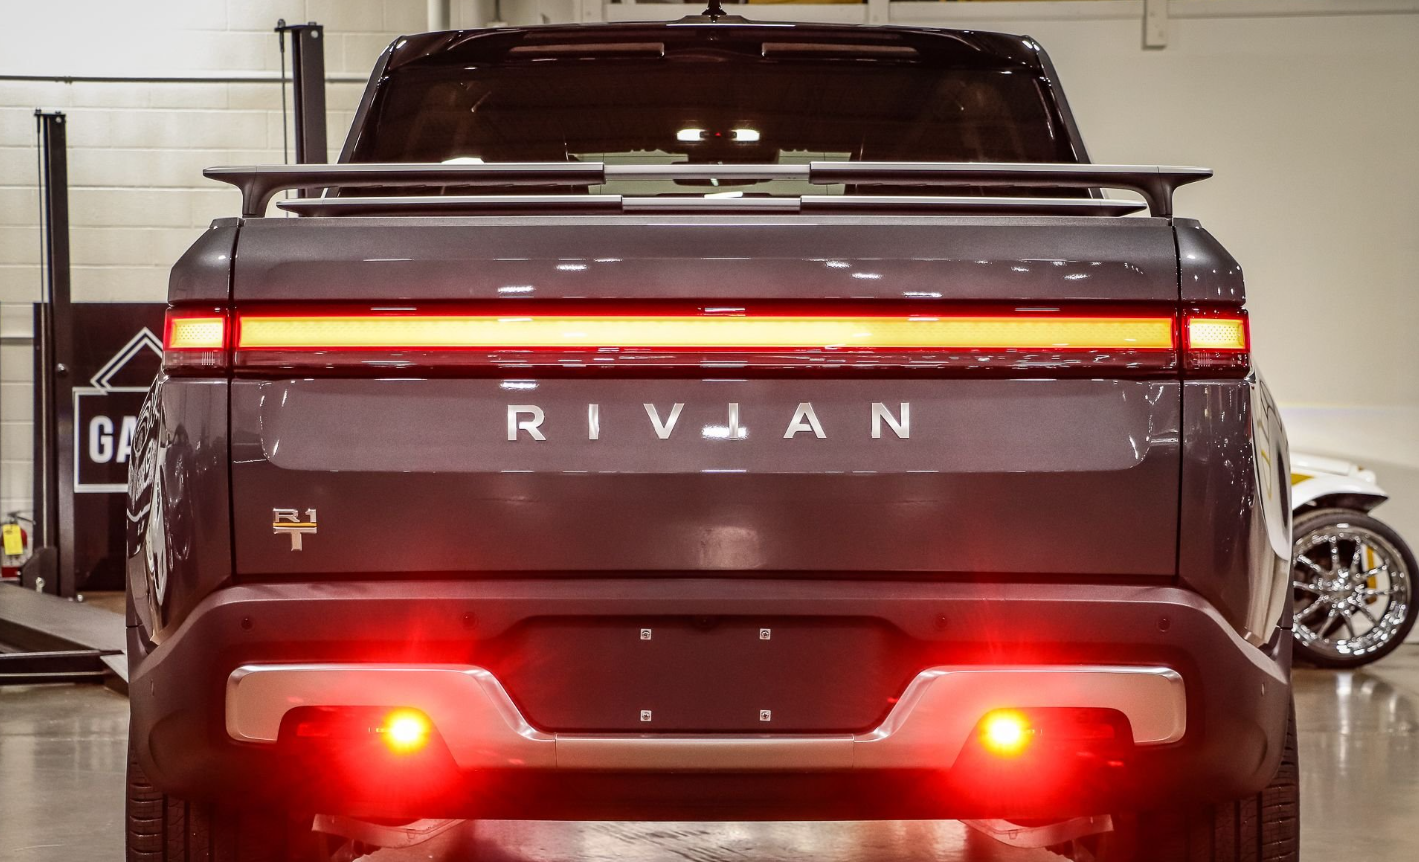 2022-rivian-t1t-launch-edition-for-sale-06